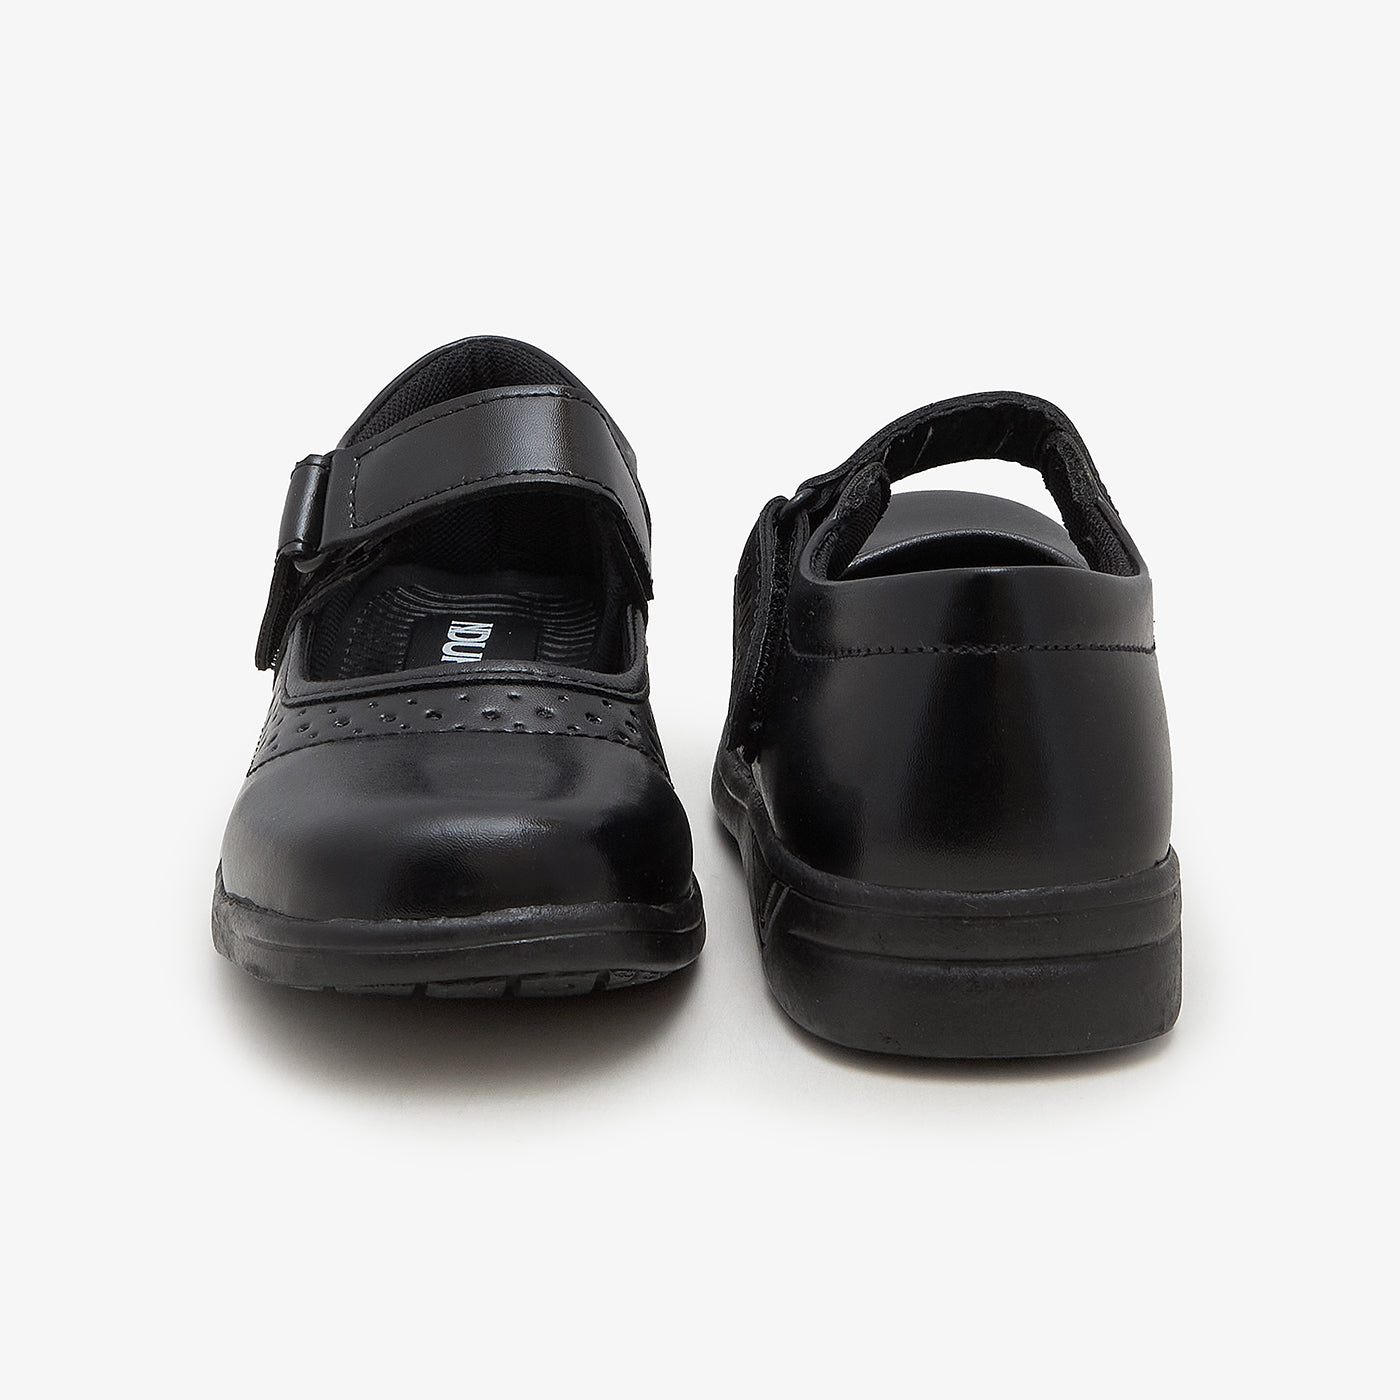 Easy Fit Girls School Shoes